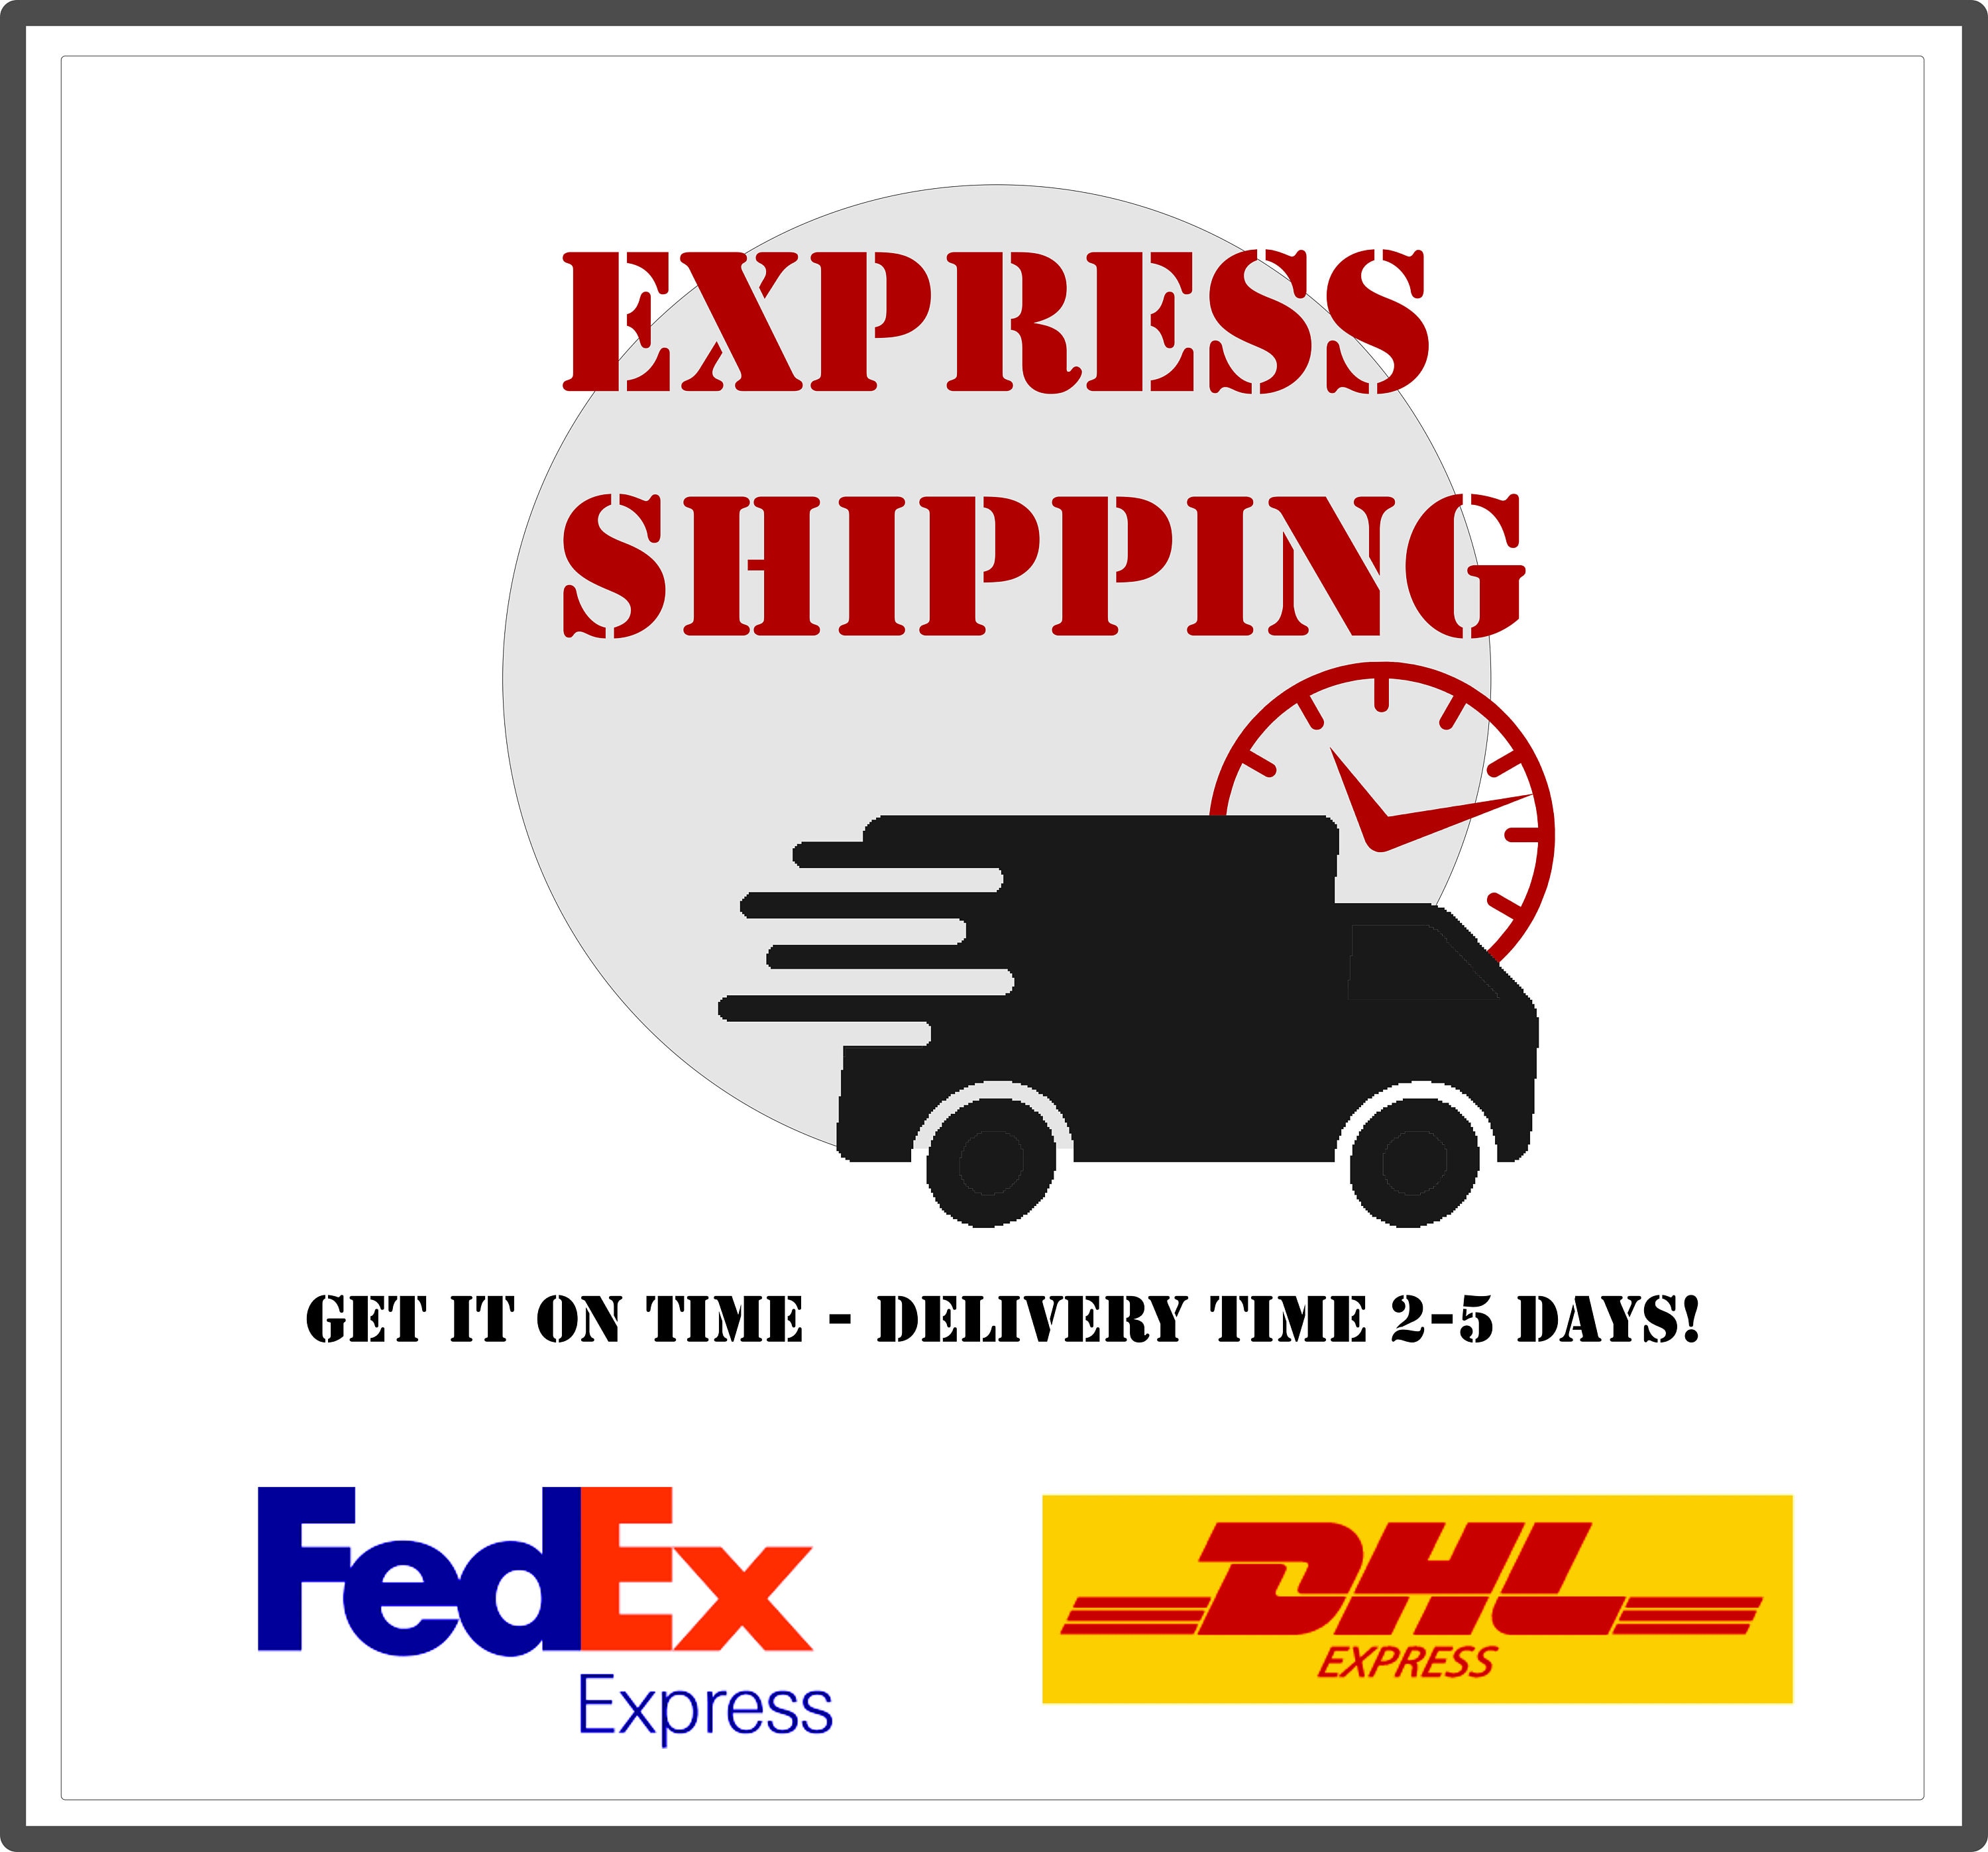 EXPRESS Shipping -  Portugal